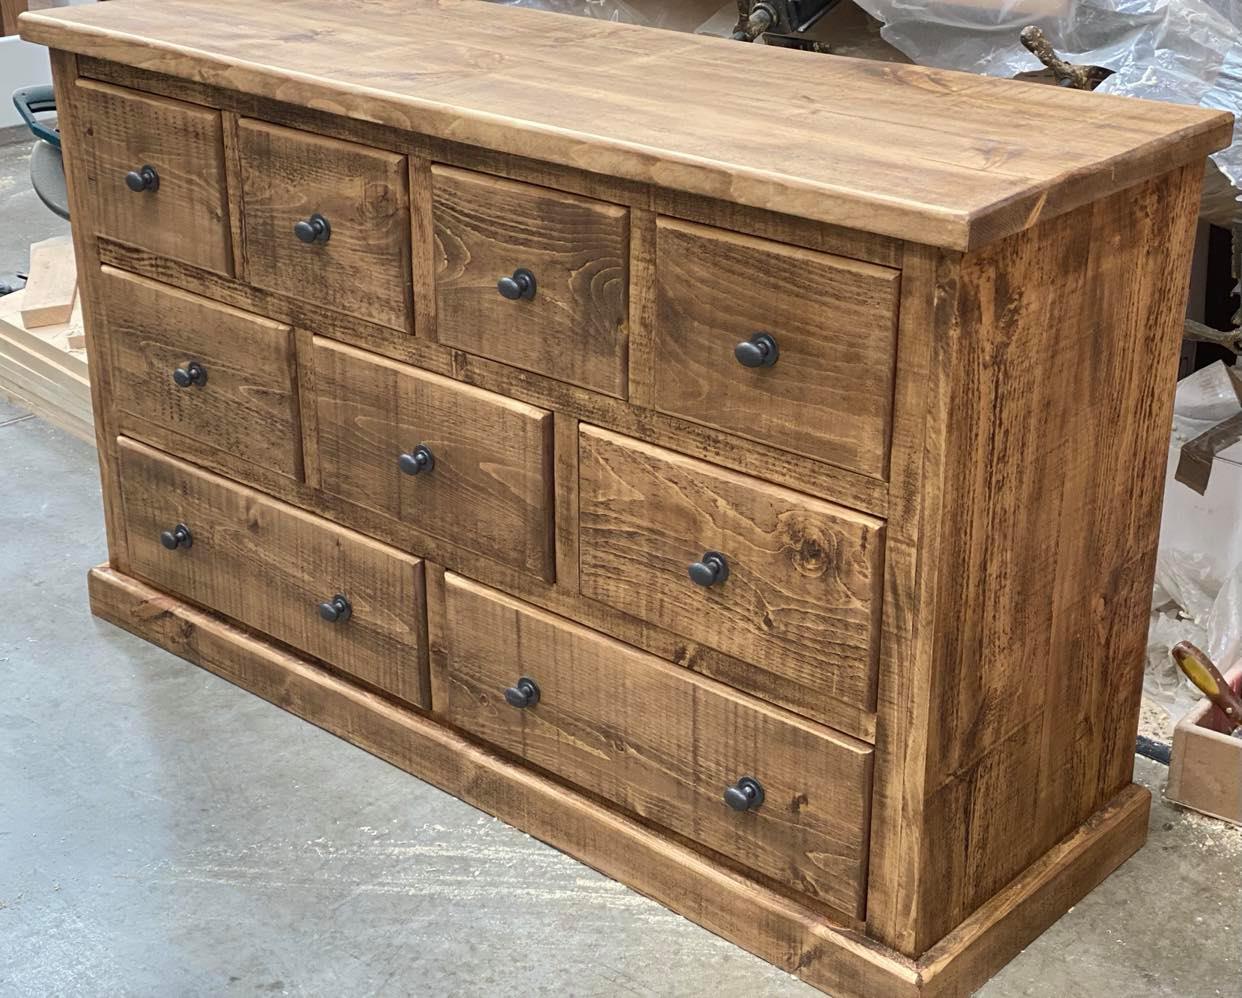 Chatsworth Rustic Wood Chest of drawers.